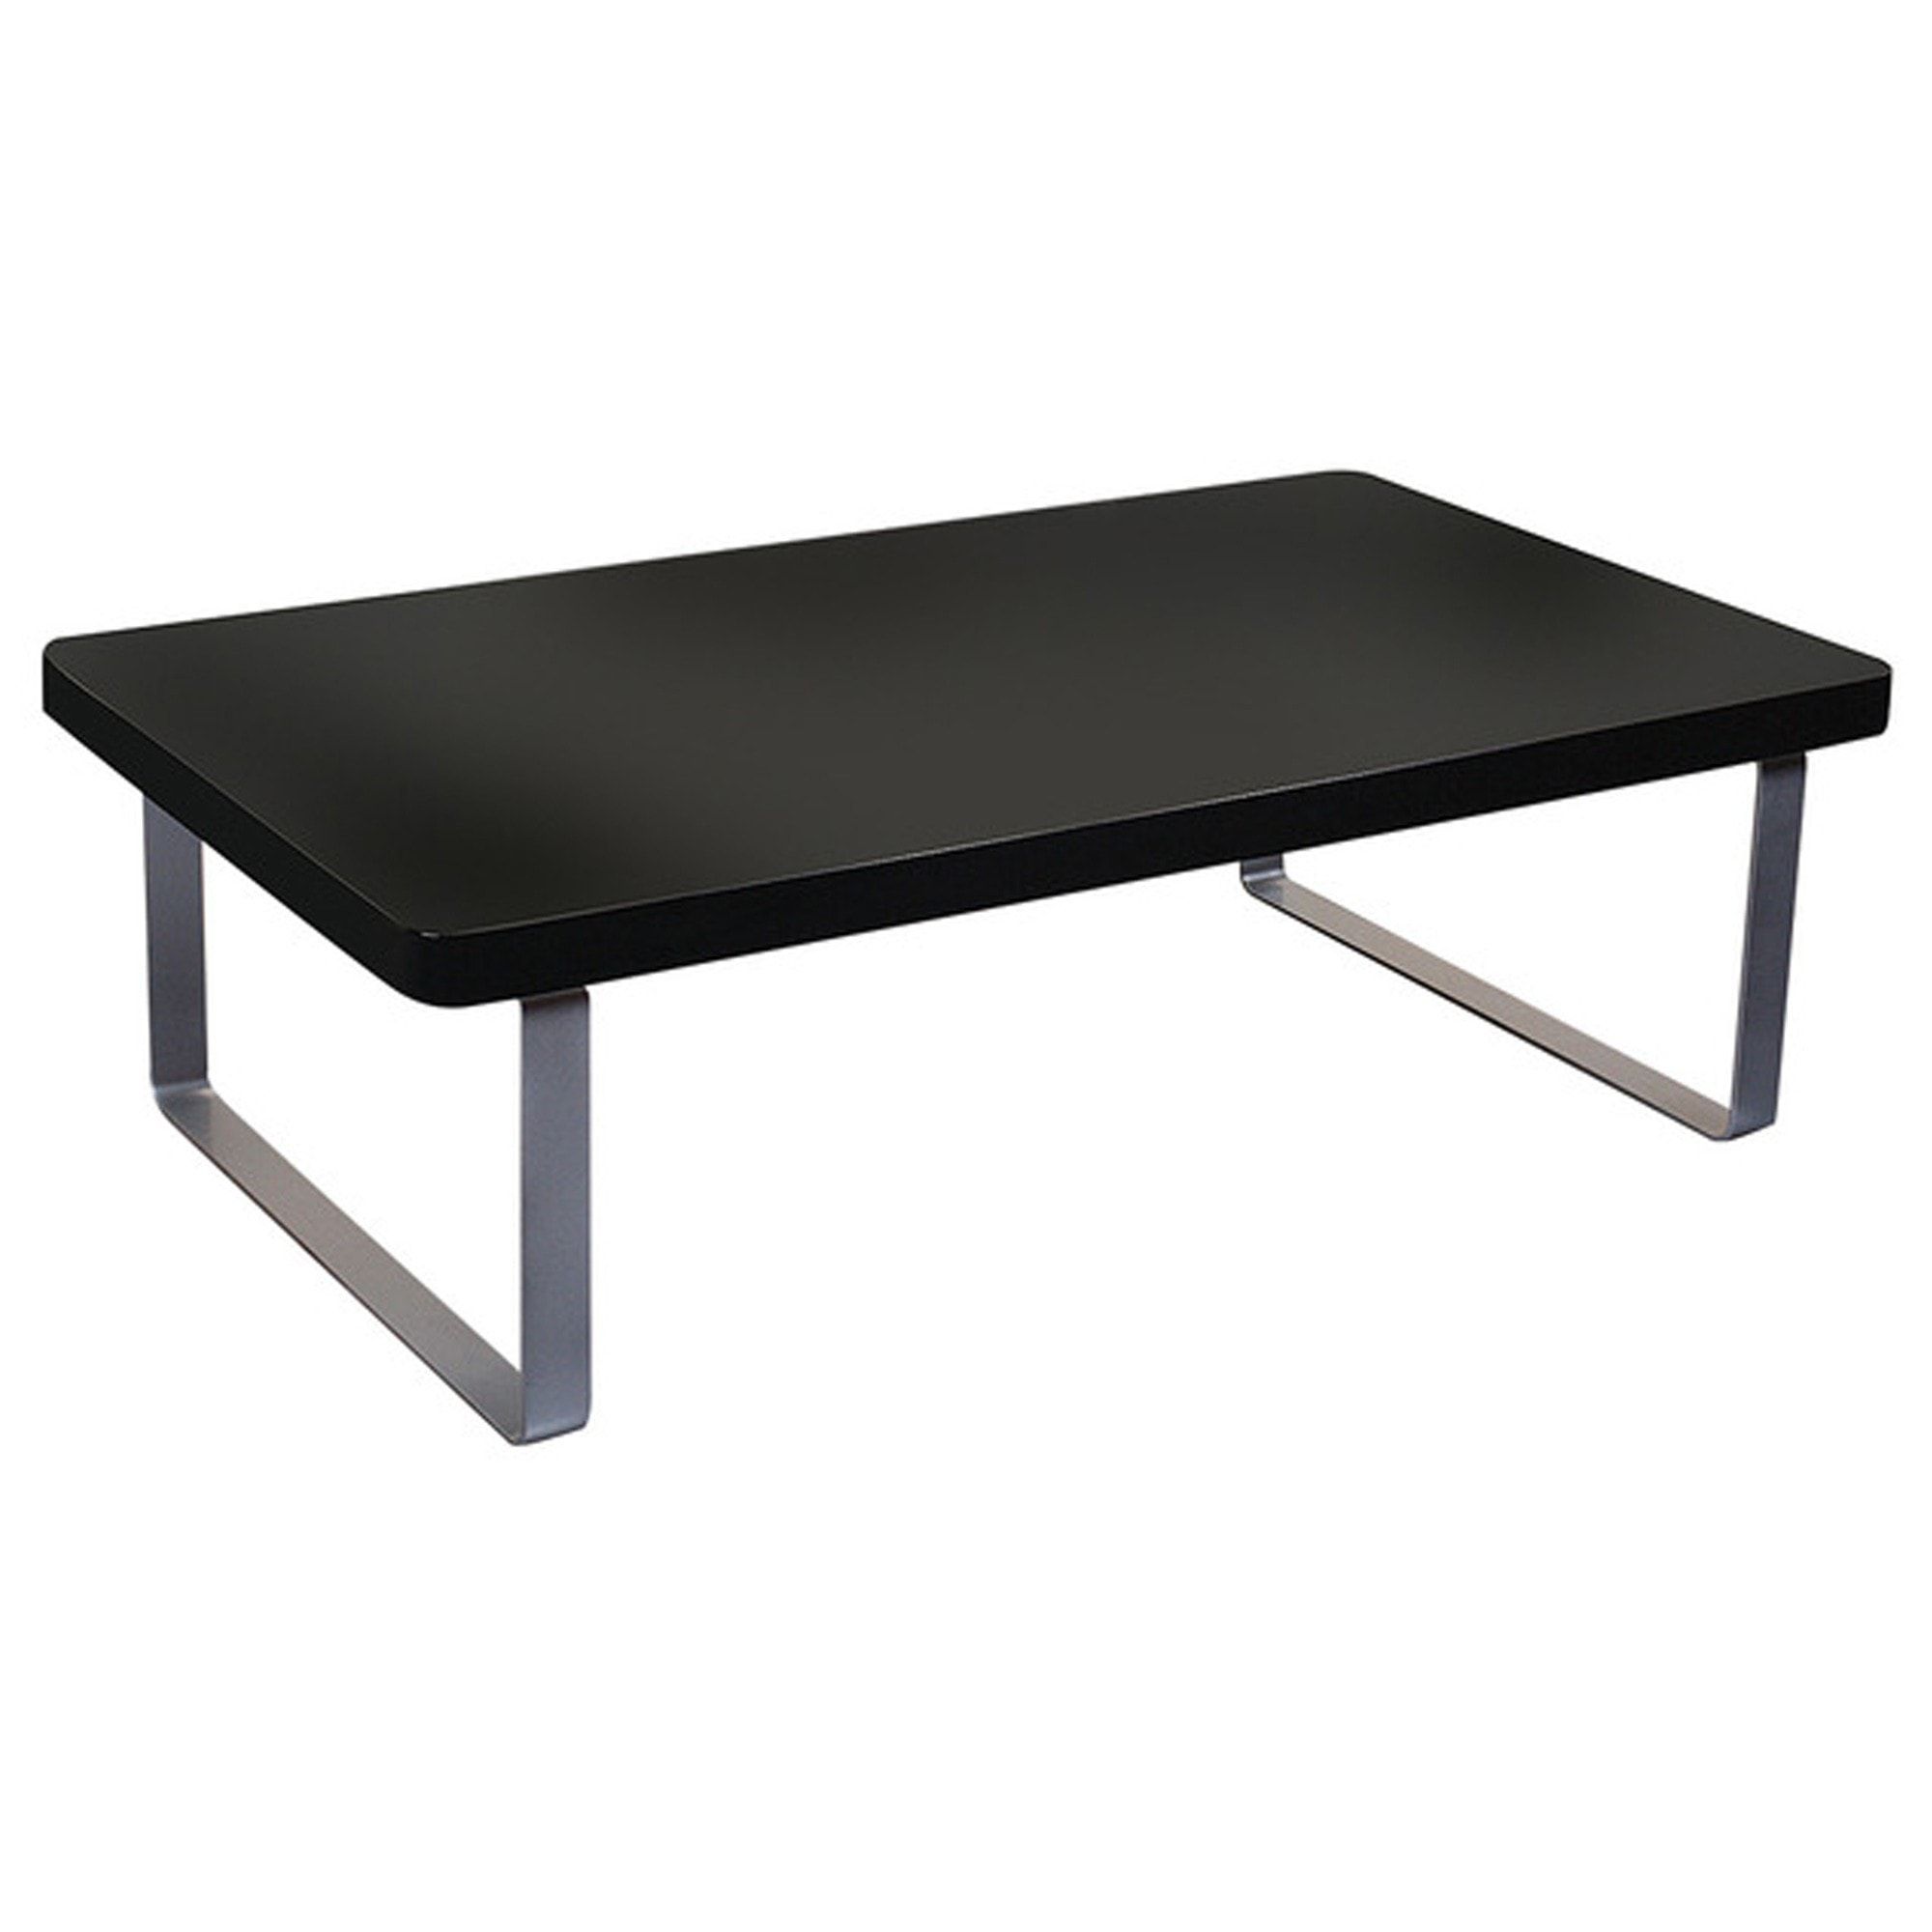 Accent Black High Gloss Coffee Table | Black Coffee Table Pertaining To High Gloss Black Coffee Tables (View 13 of 15)